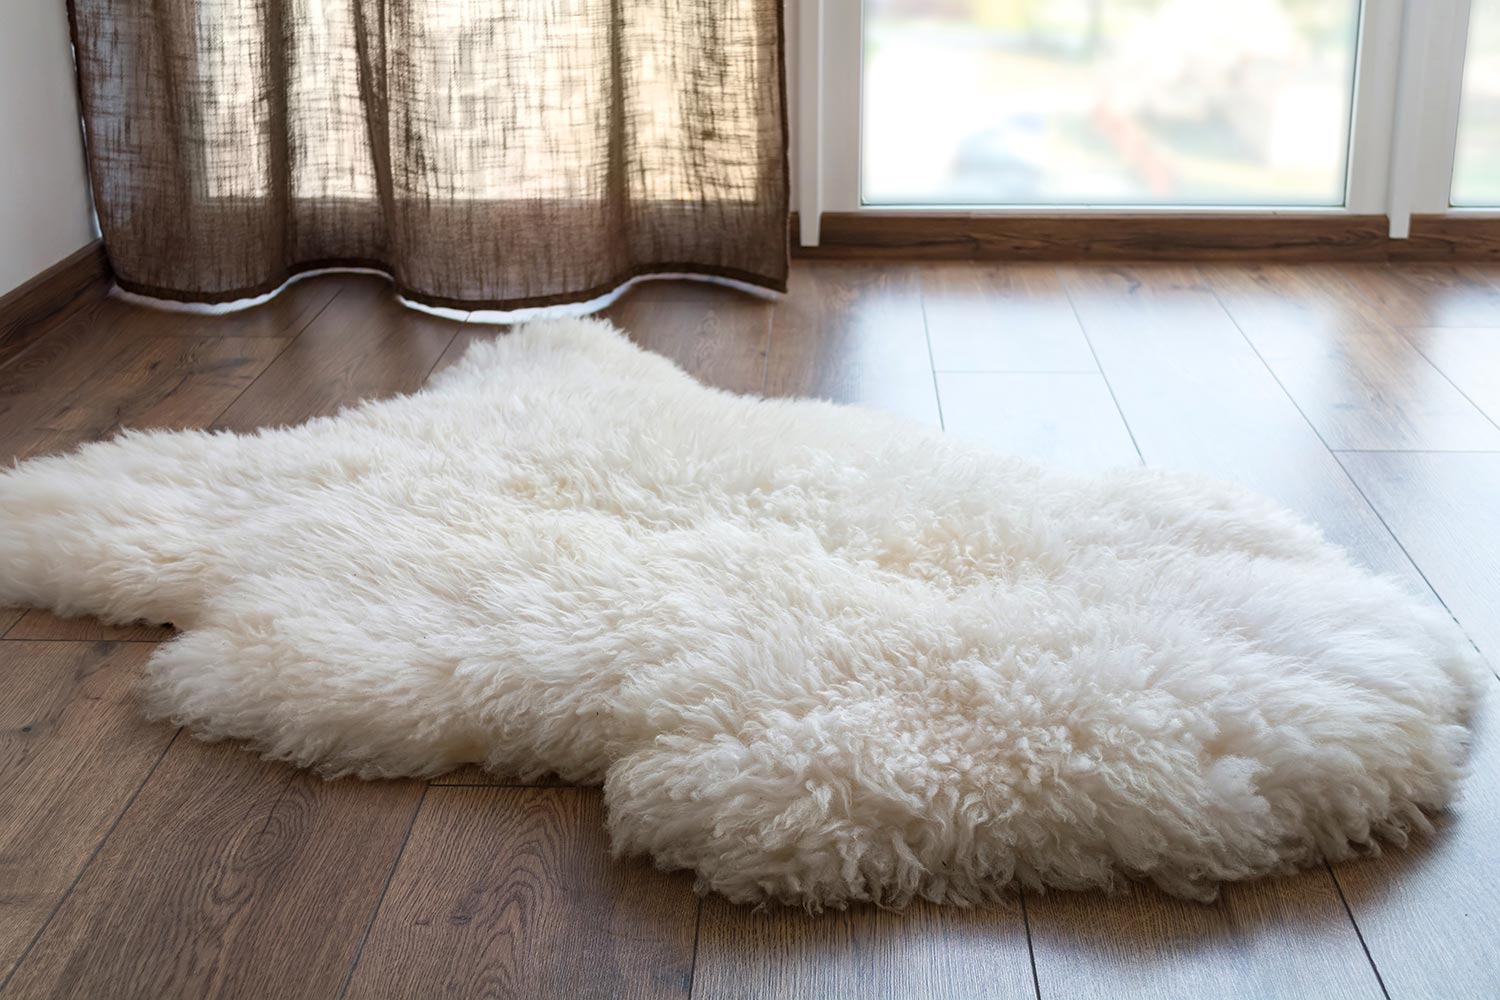 Sheep skin on the laminate floor in the room